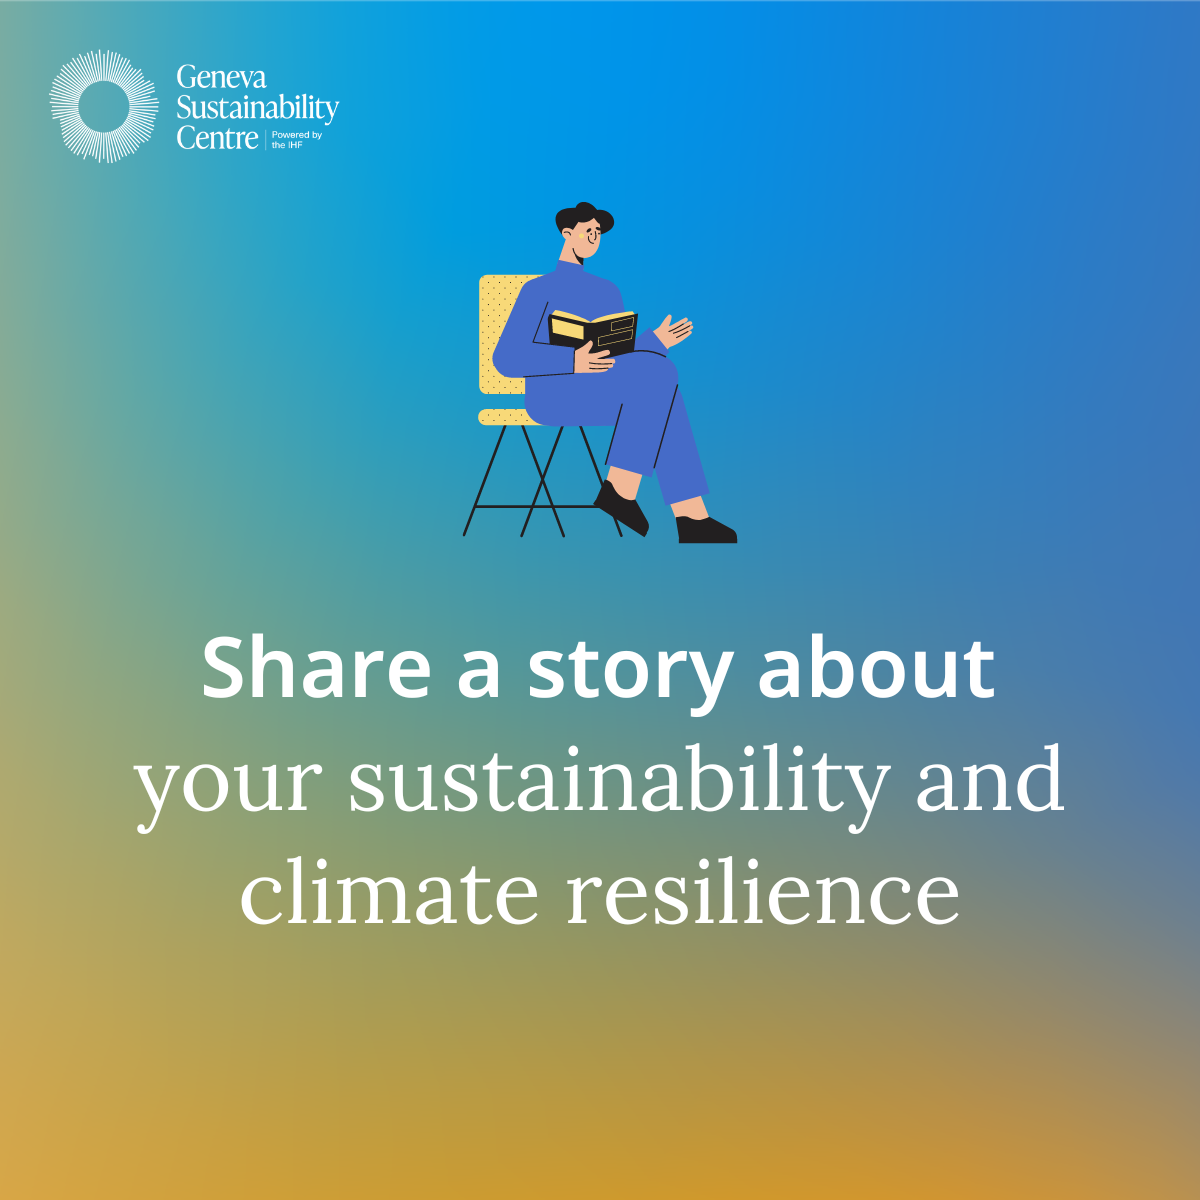 Share a story about your sustainability and climate resilience